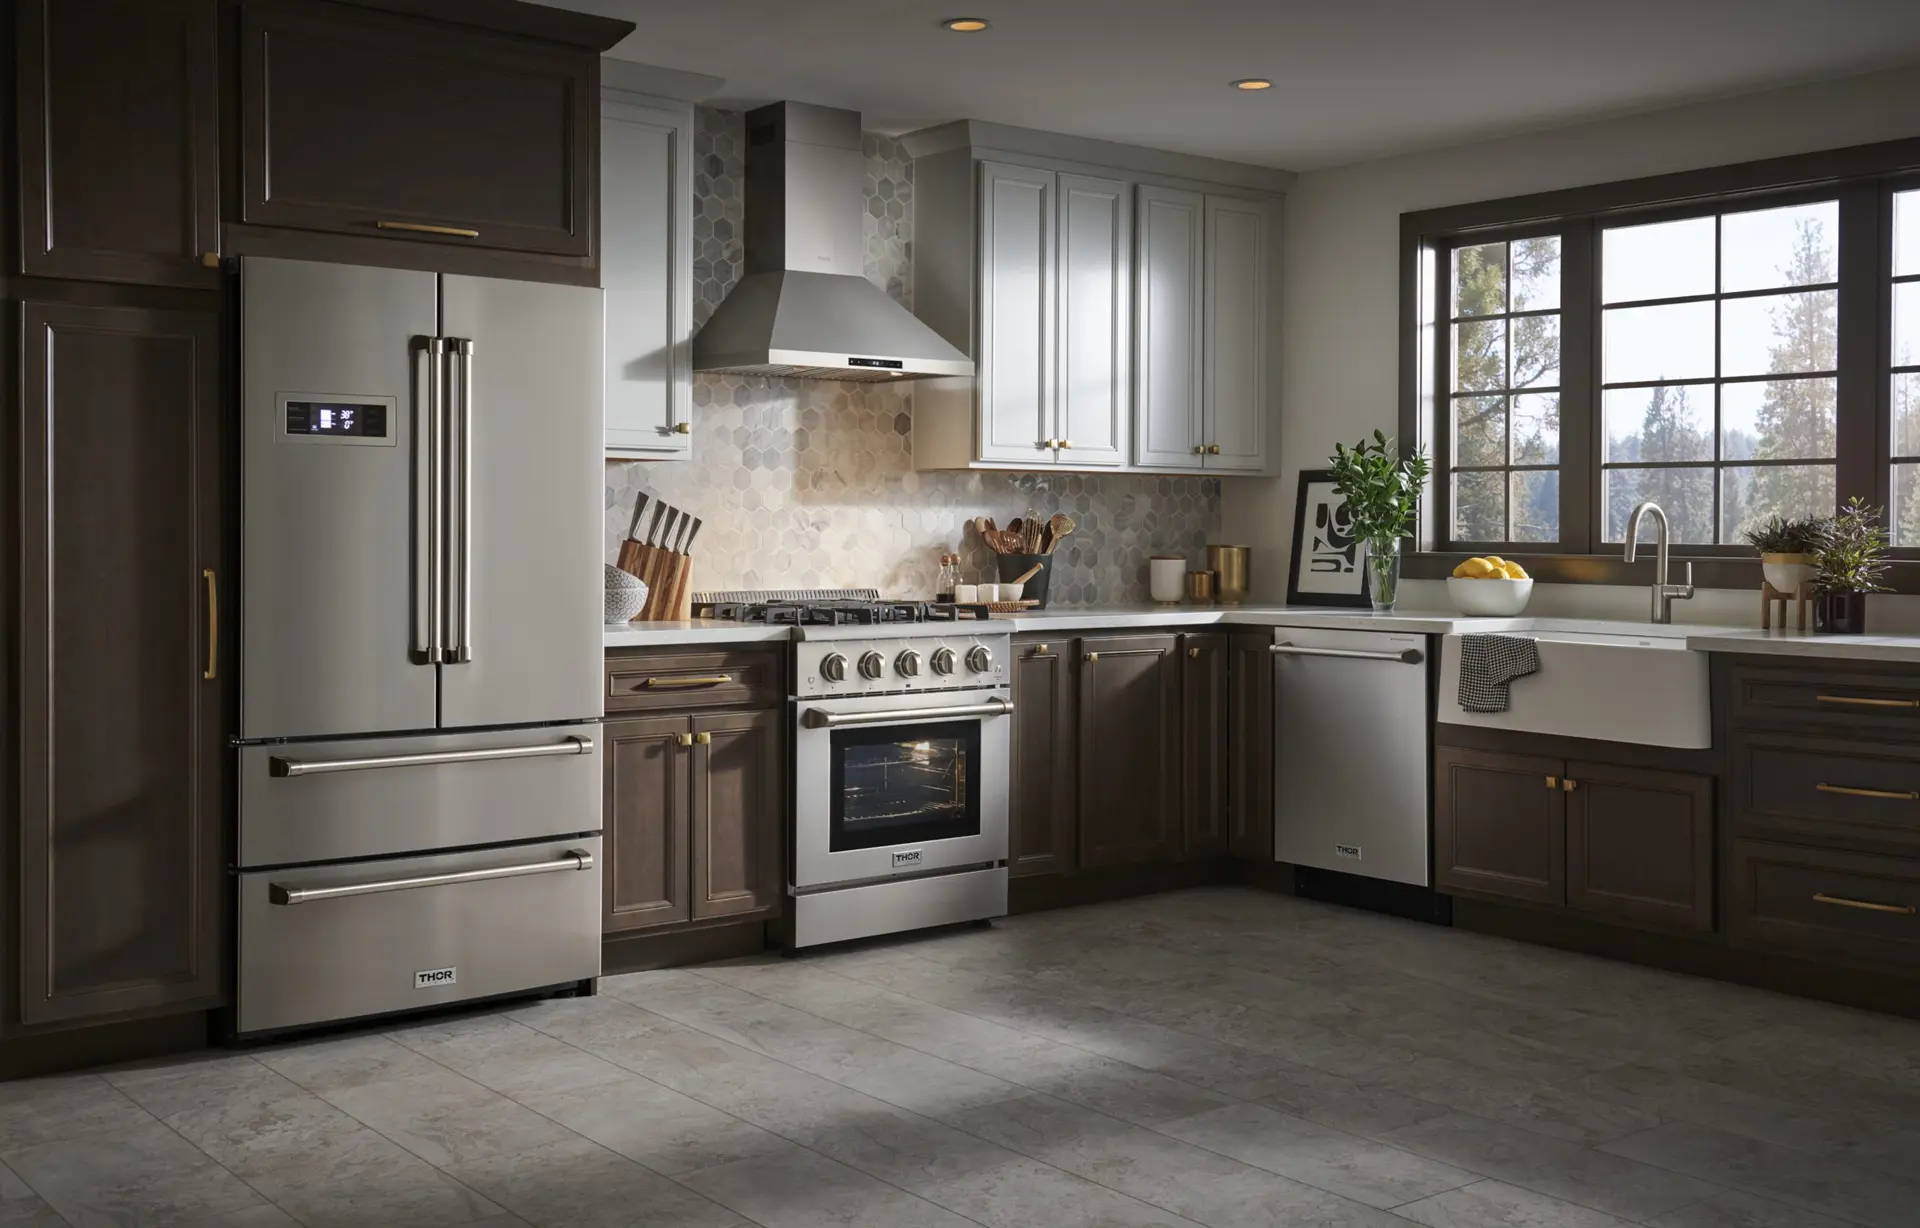  Top Rated Kitchen Packages.-Shop Reno Sparks Best Place To Buy Your Dream Kitchen. We Service What We Sell!